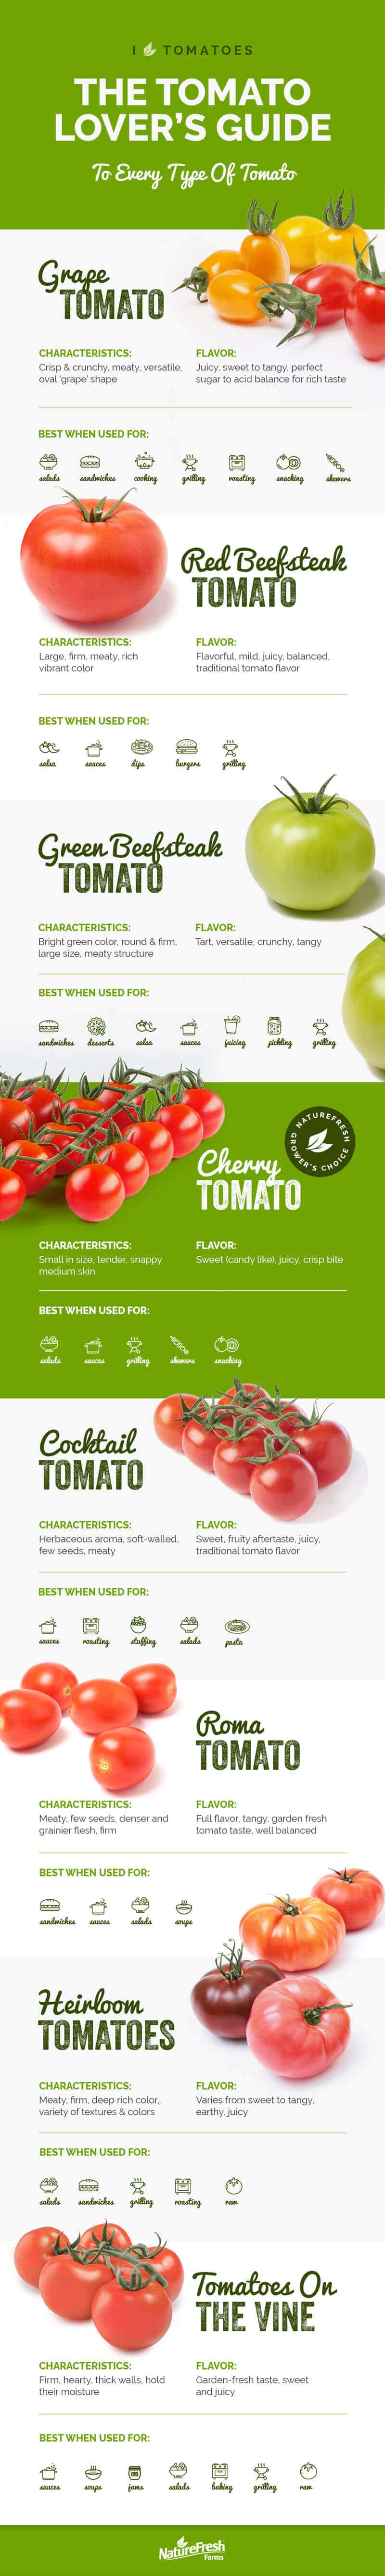 can dogs and cats eat tomatoes